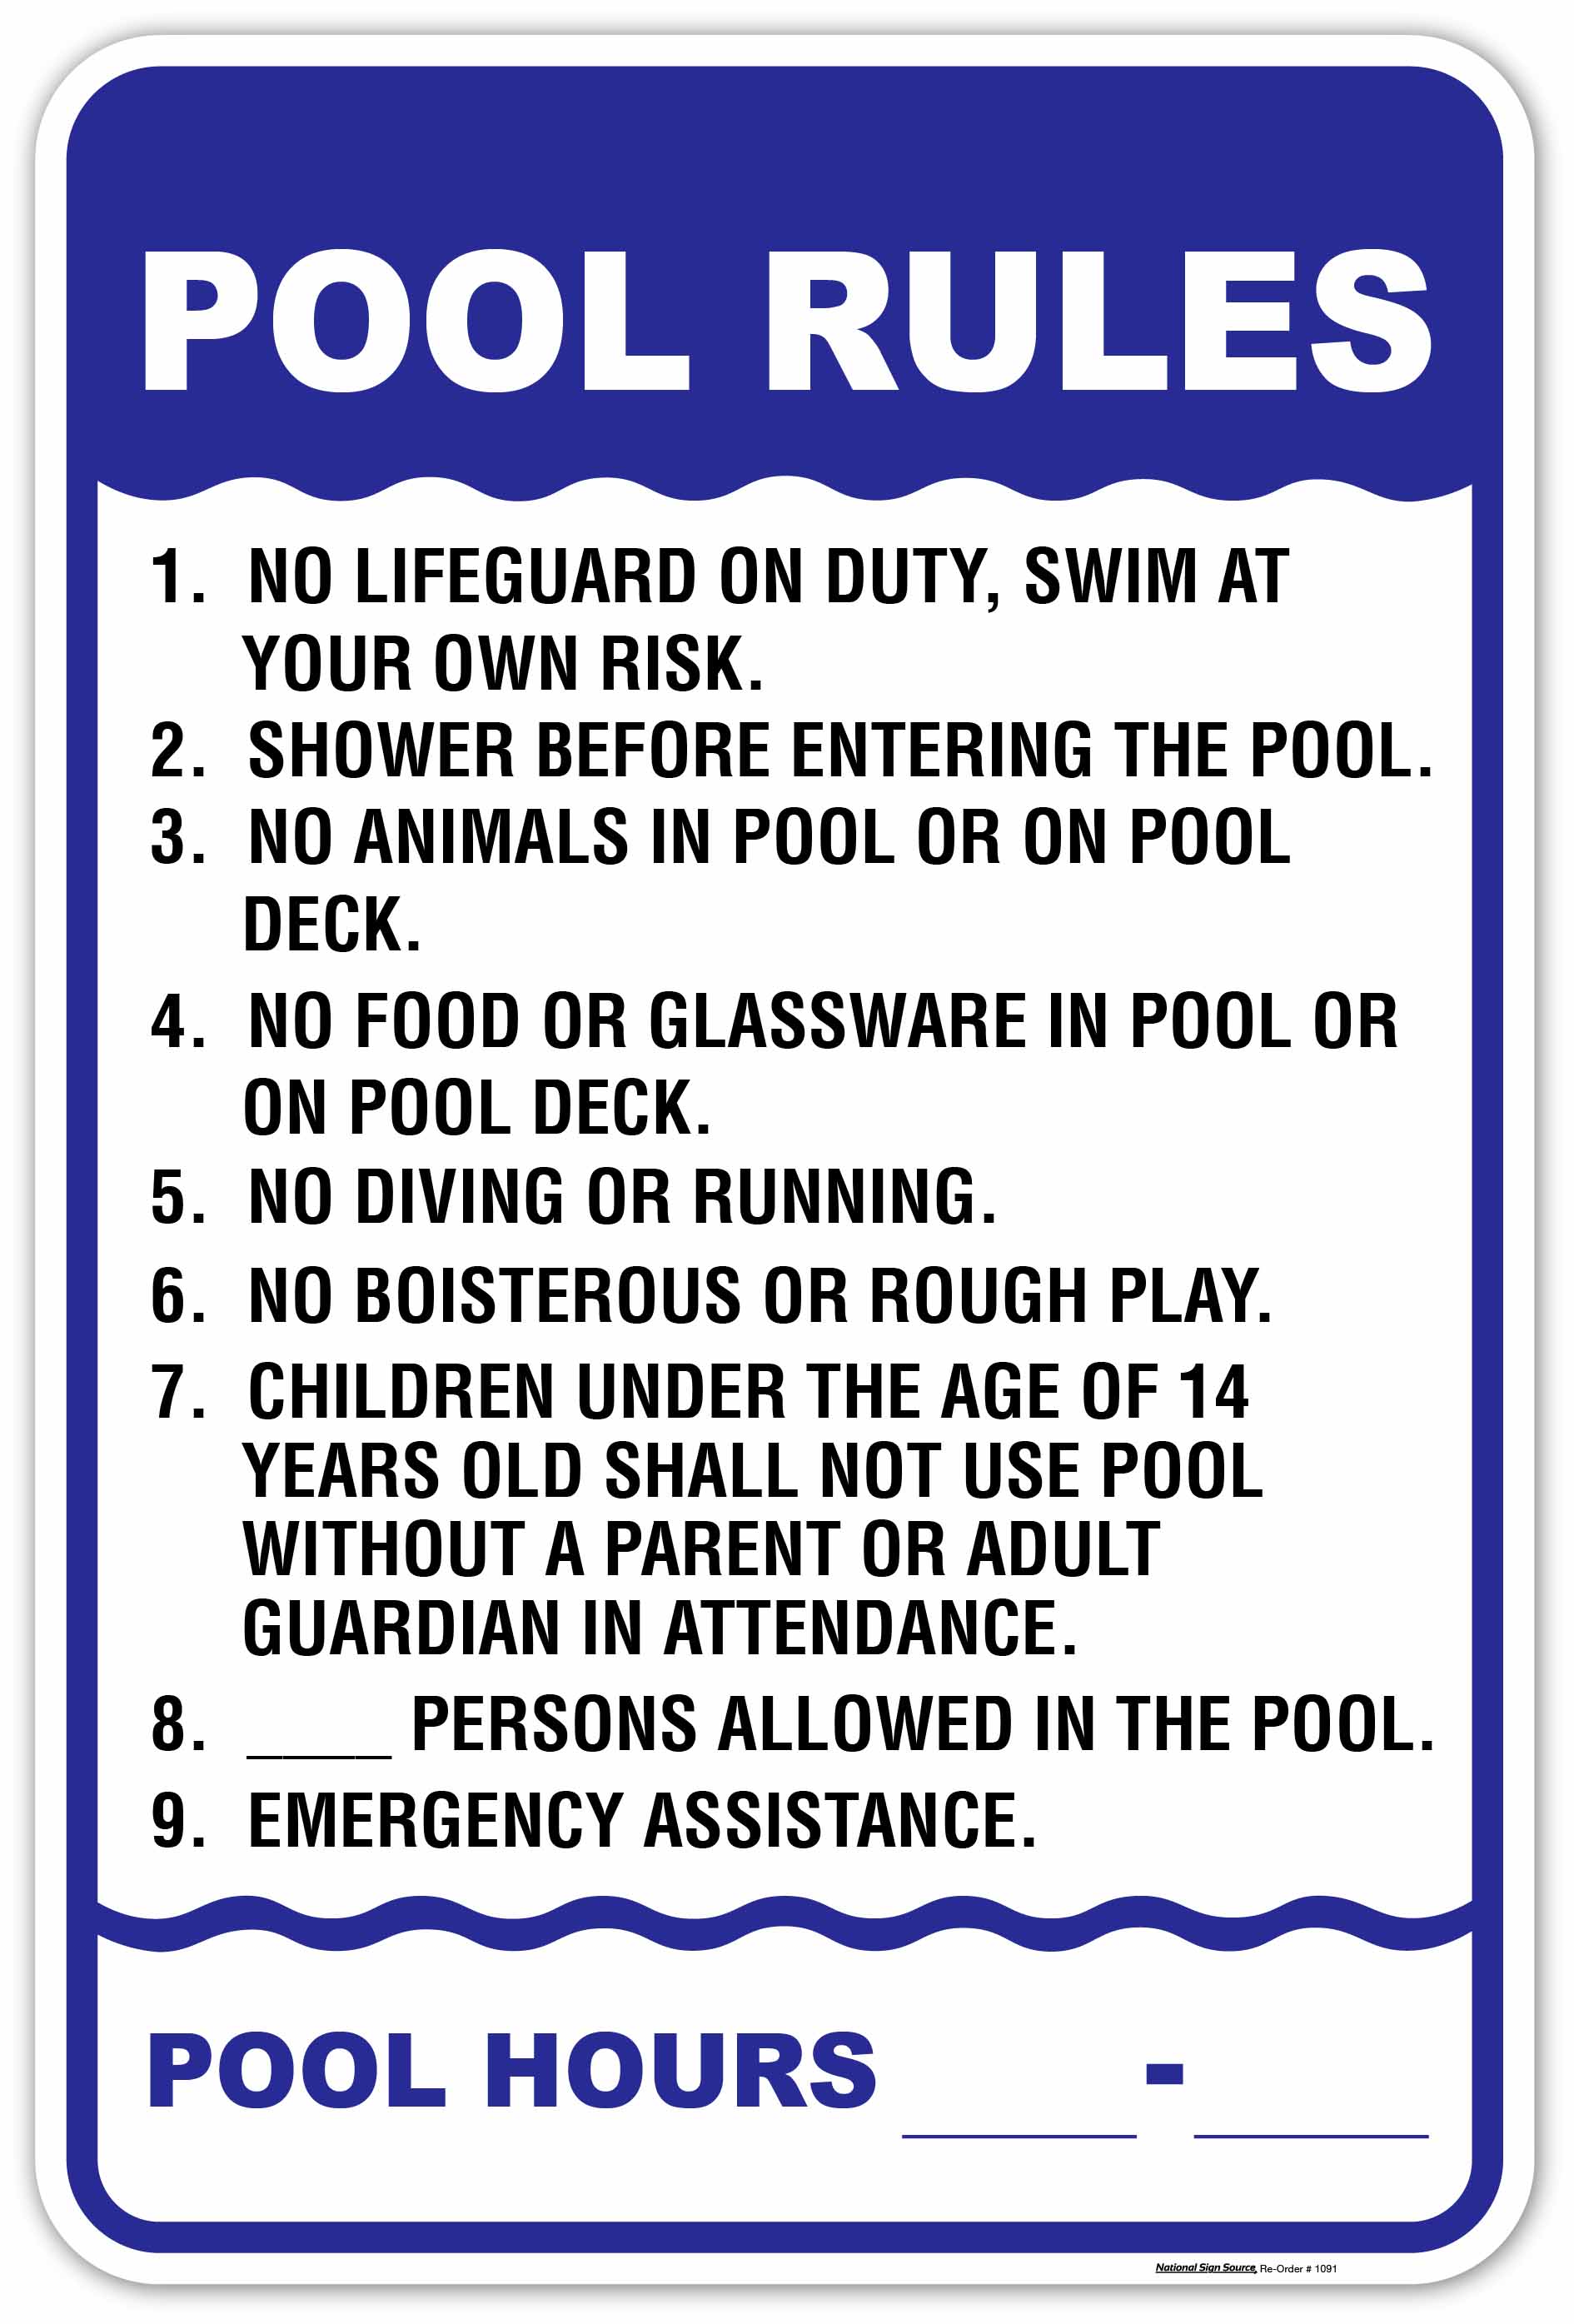 Dibond, Aluminum, or Vinyl Pool Rules Signs - Manufactured by National Sign Source